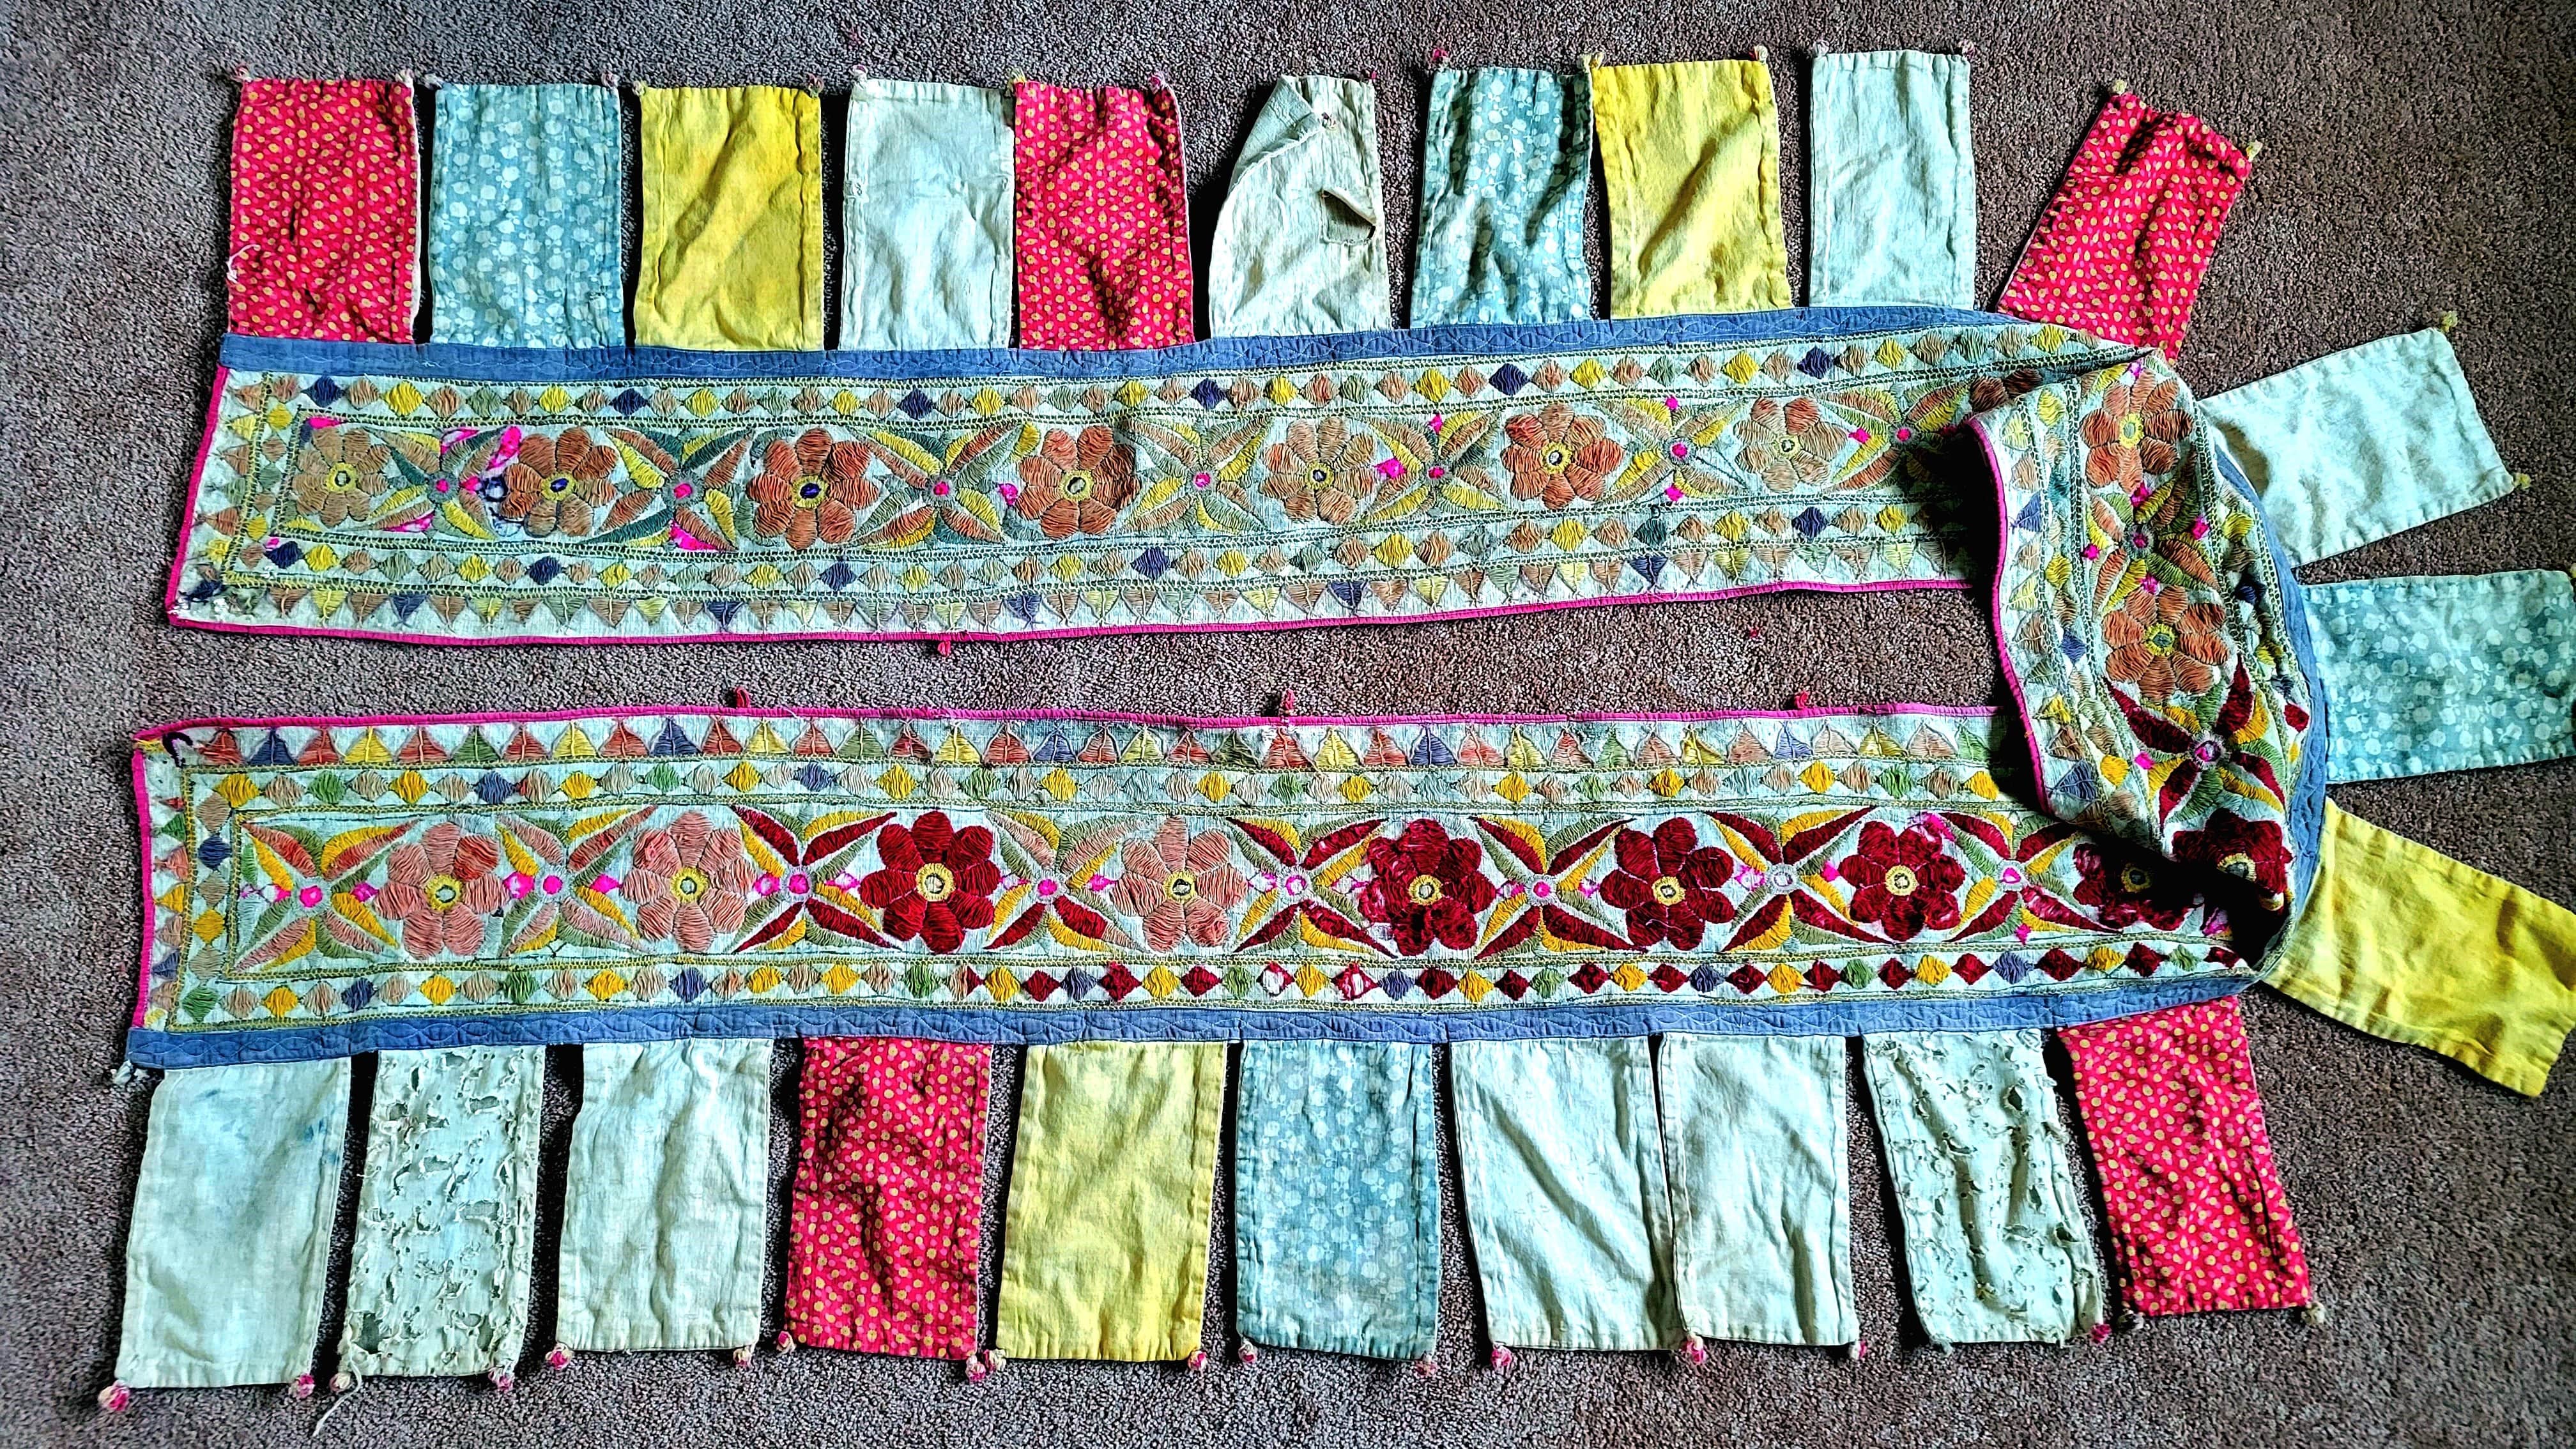 long wall hanging embroidery with flags hanging.